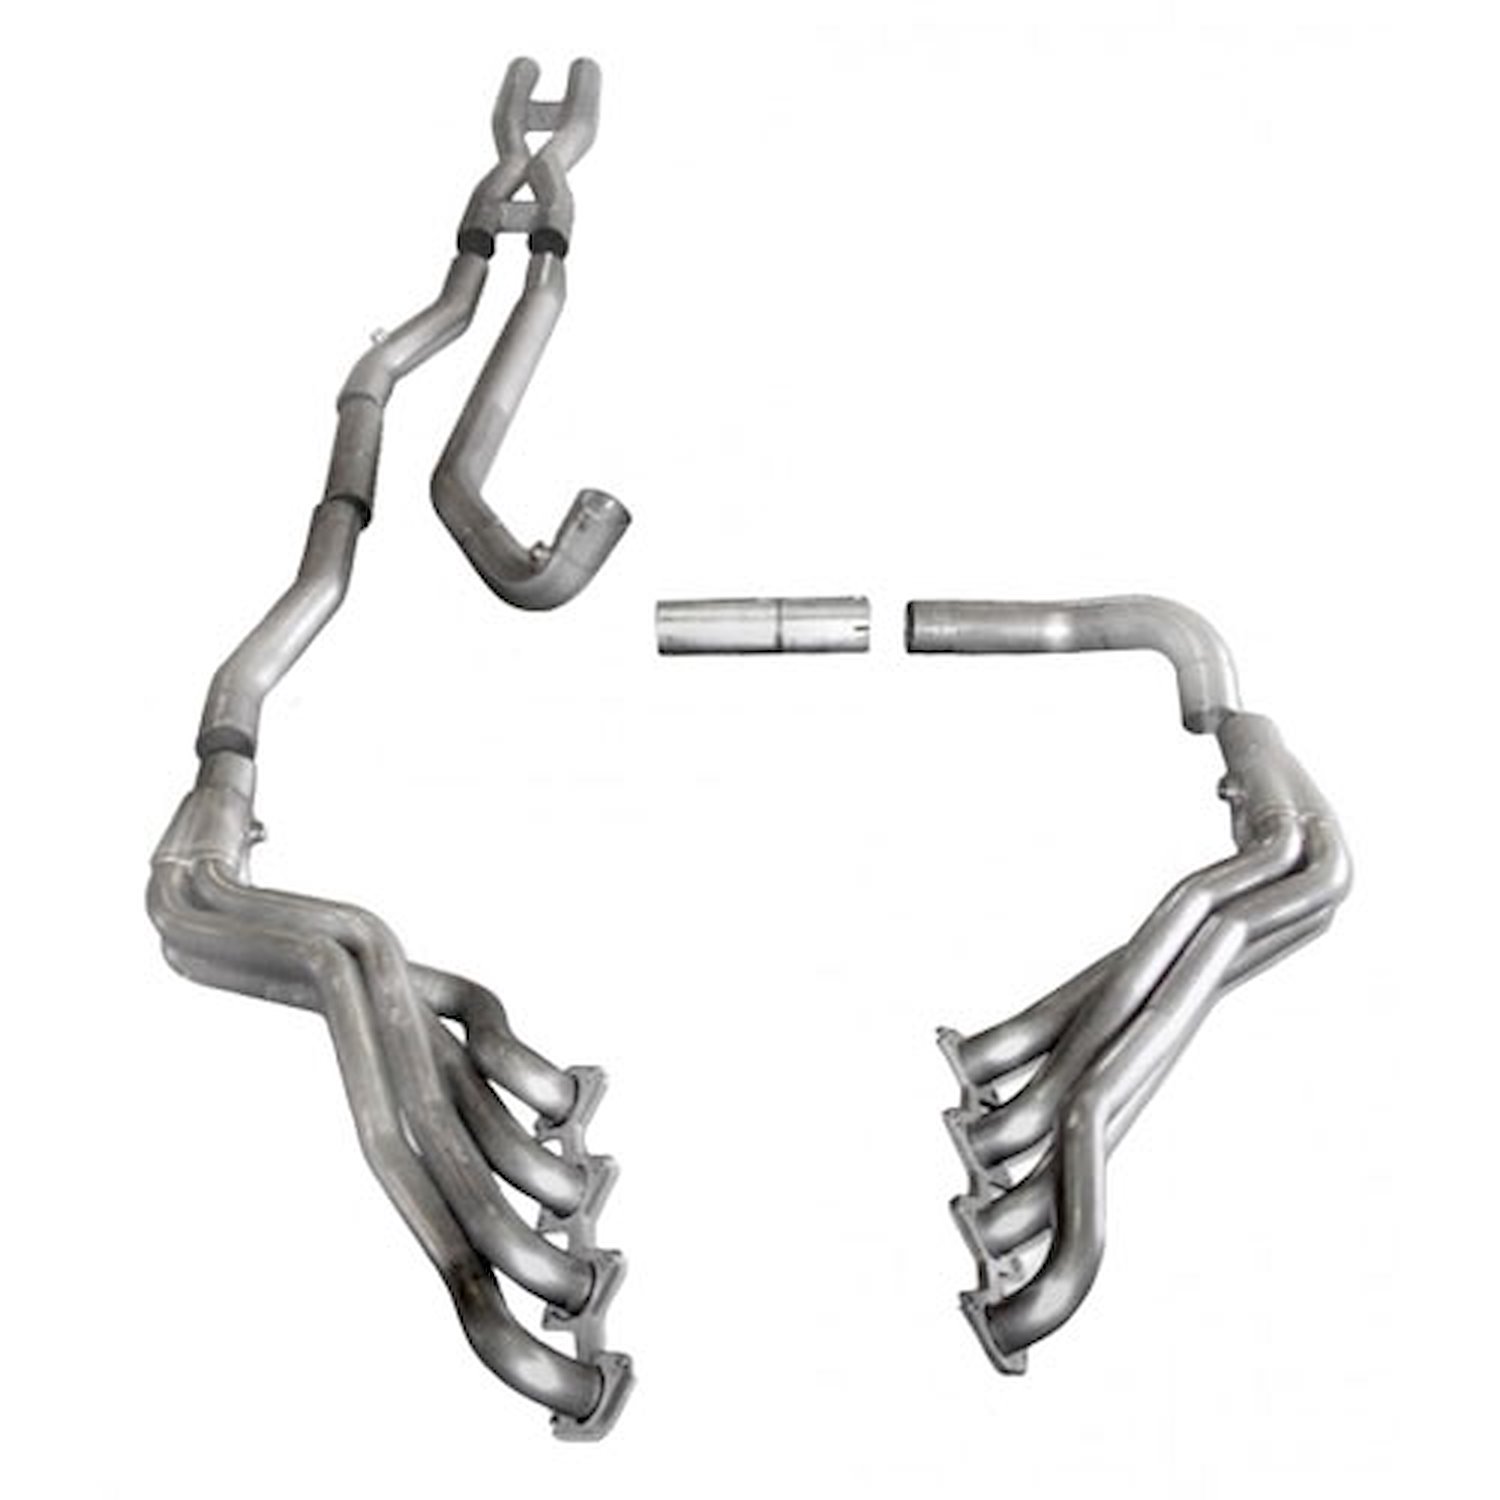 2009-2010 Ford F-150 5.4L 2WD 4WD Truck headers with 1.750 dia. primaries and 2.5 slip fit collector